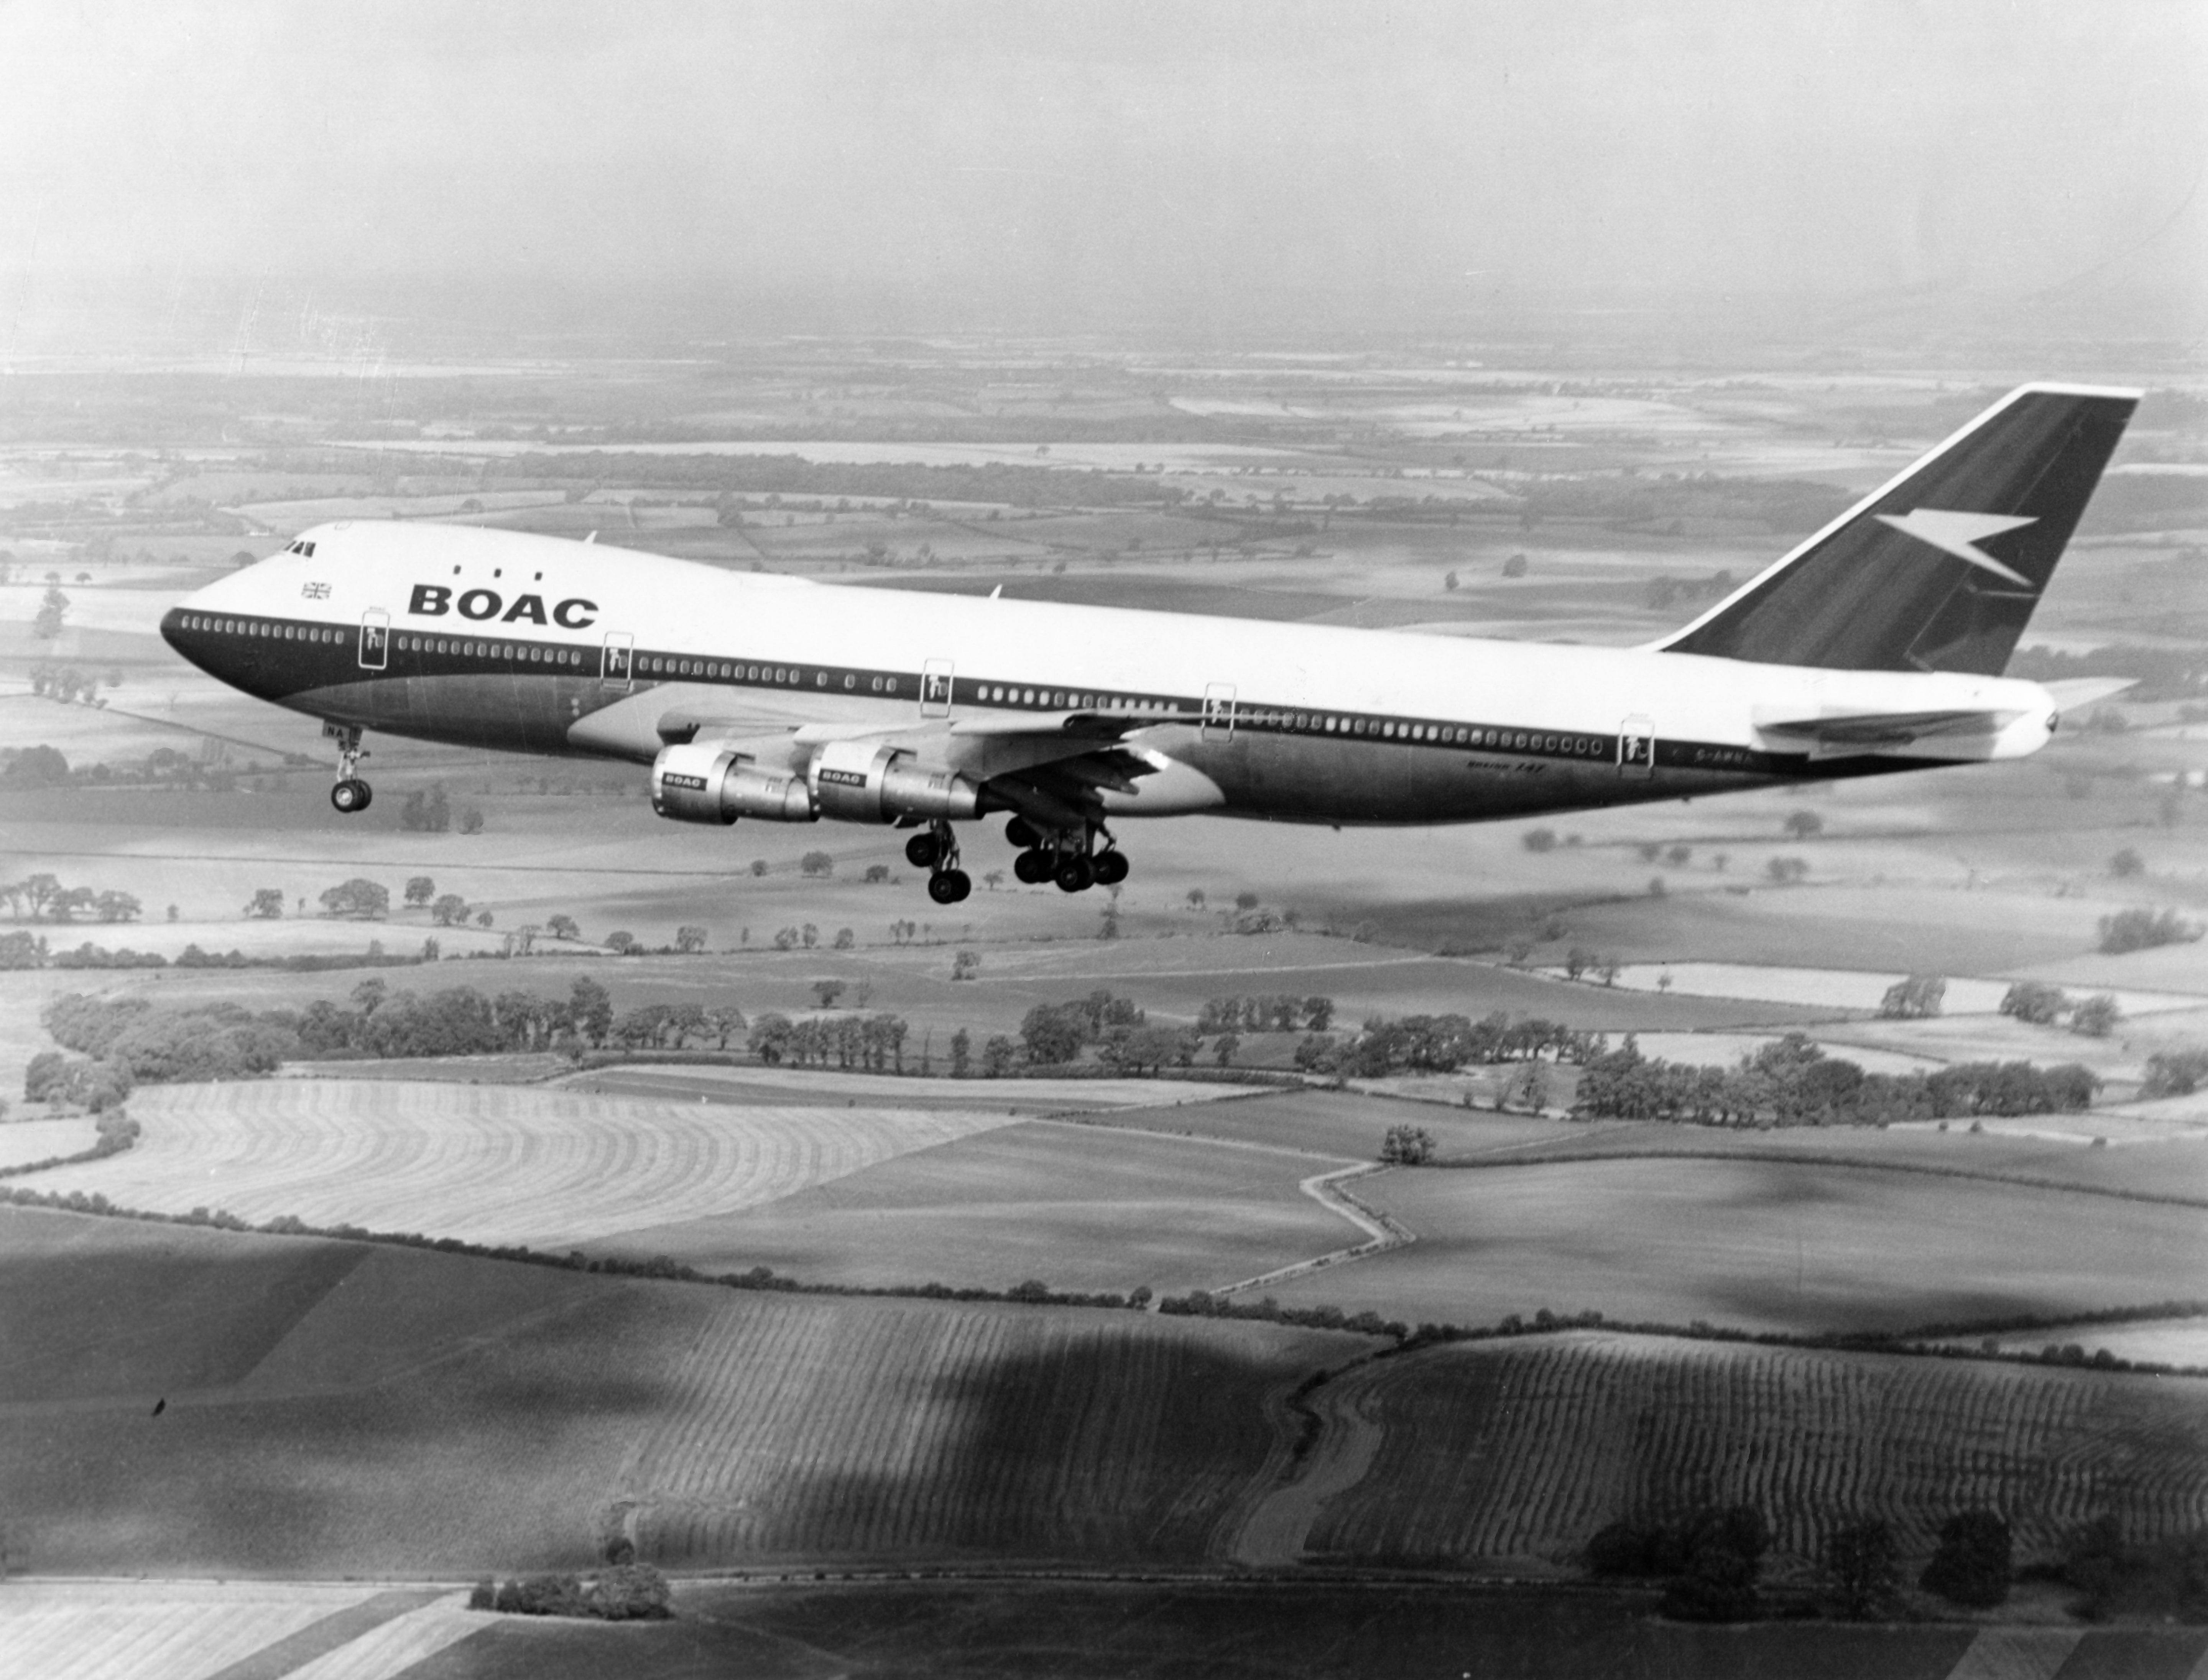 British Airways will retire its fleet of Boeing 747 aircraft, fondly known as ‘The Queen of the Skies’, effectively immediately.